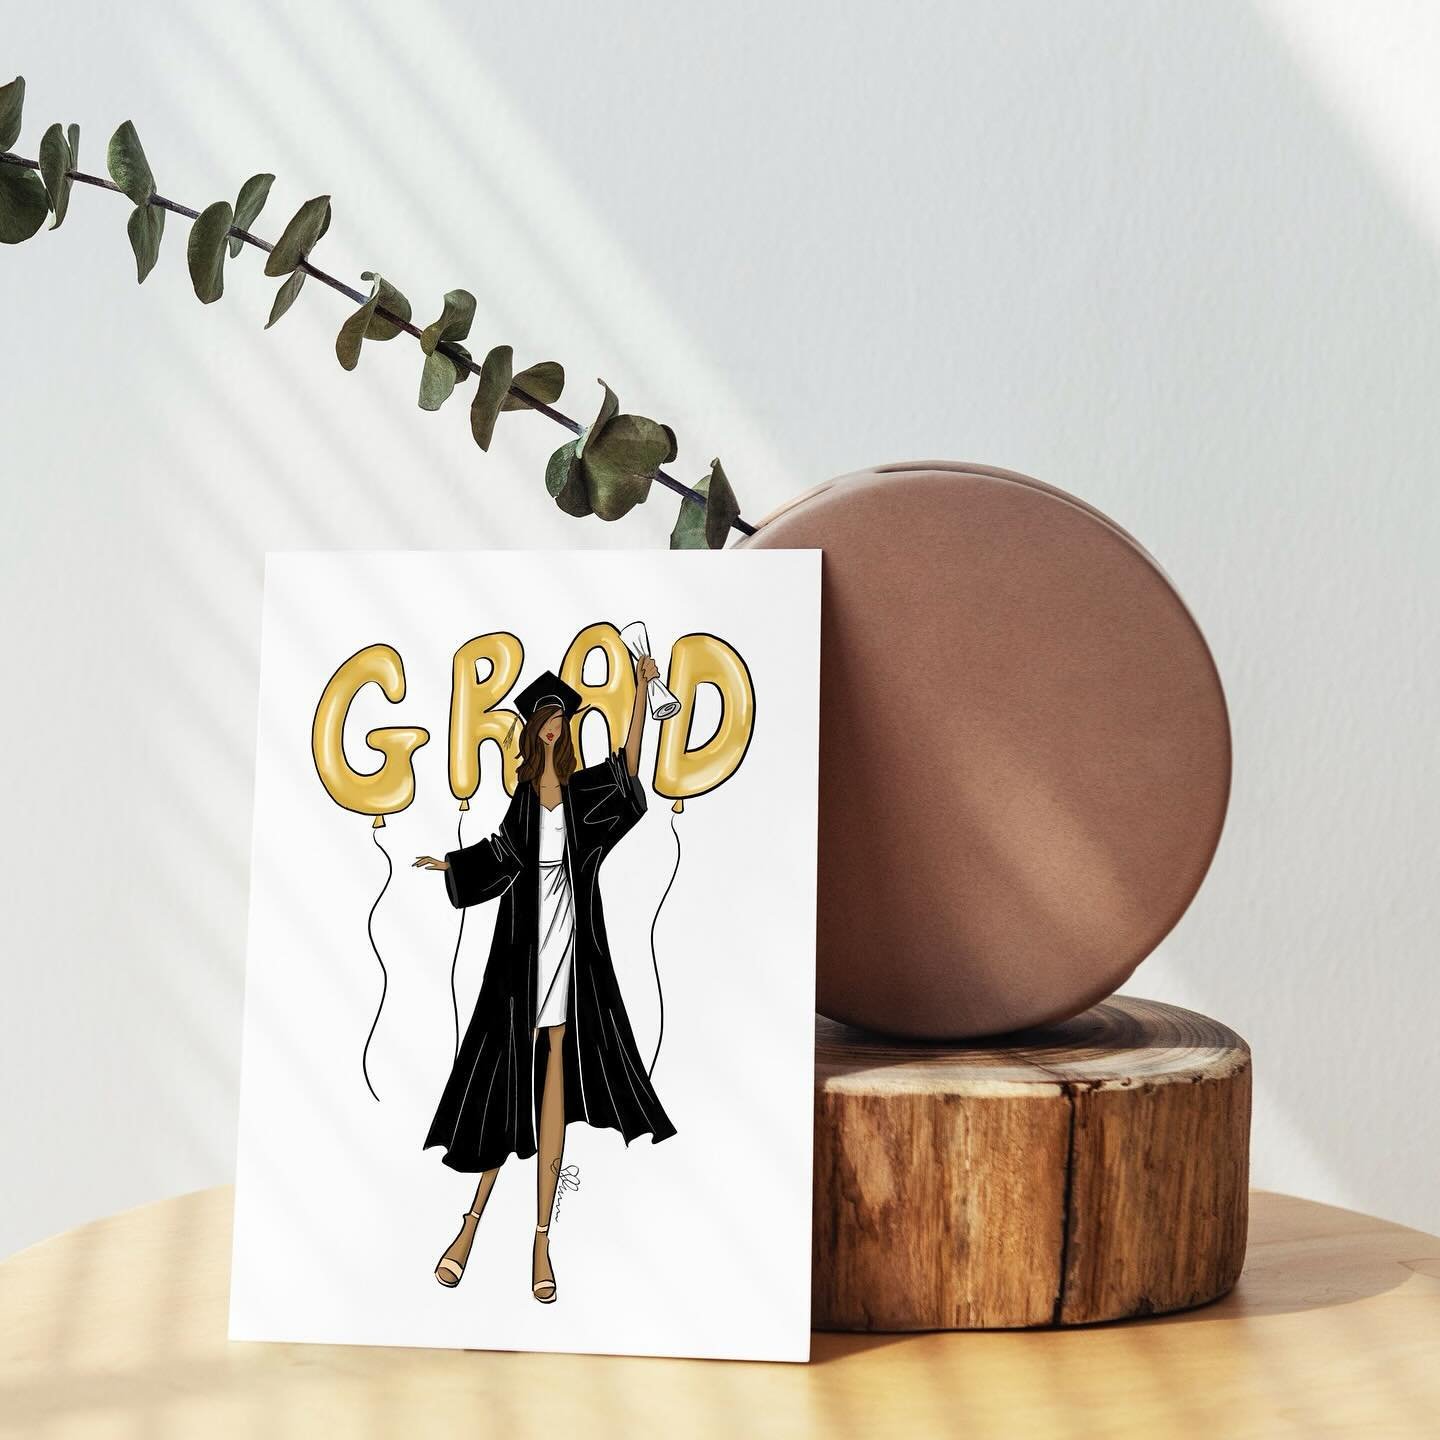 Whether it&rsquo;s capturing your academic journey, highlighting favorite memories, or showcasing future dreams, let&rsquo;s create personalized artwork that celebrates your achievements 🎓

Make your graduation extra special by ordering your customi